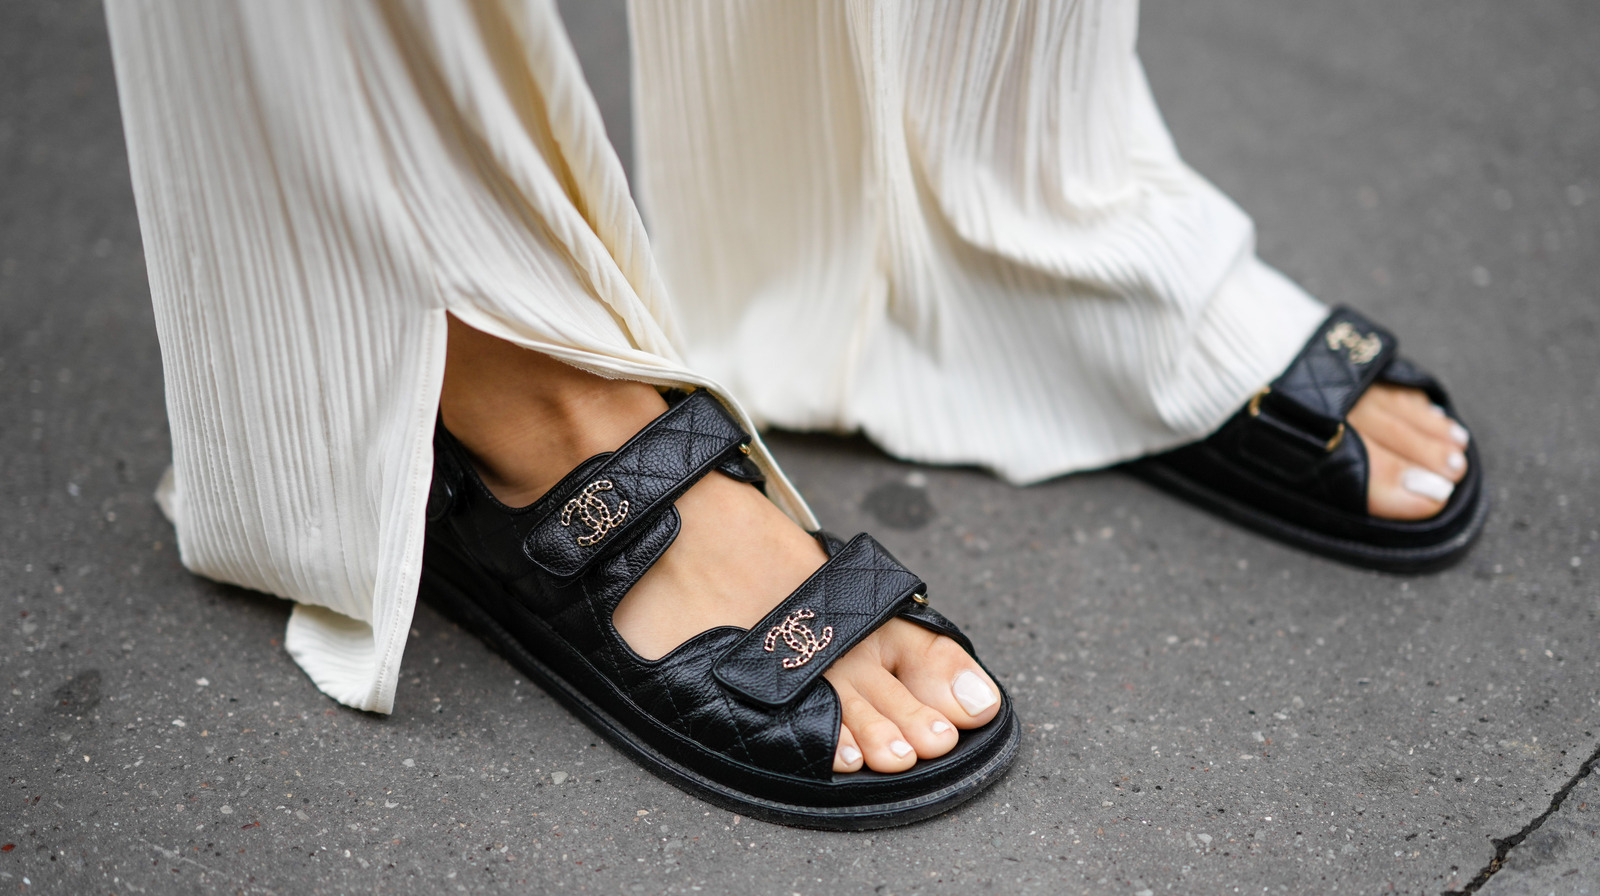 Dad Sandals: The Comfortable Summer Shoe Trend Being Remixed Right Now